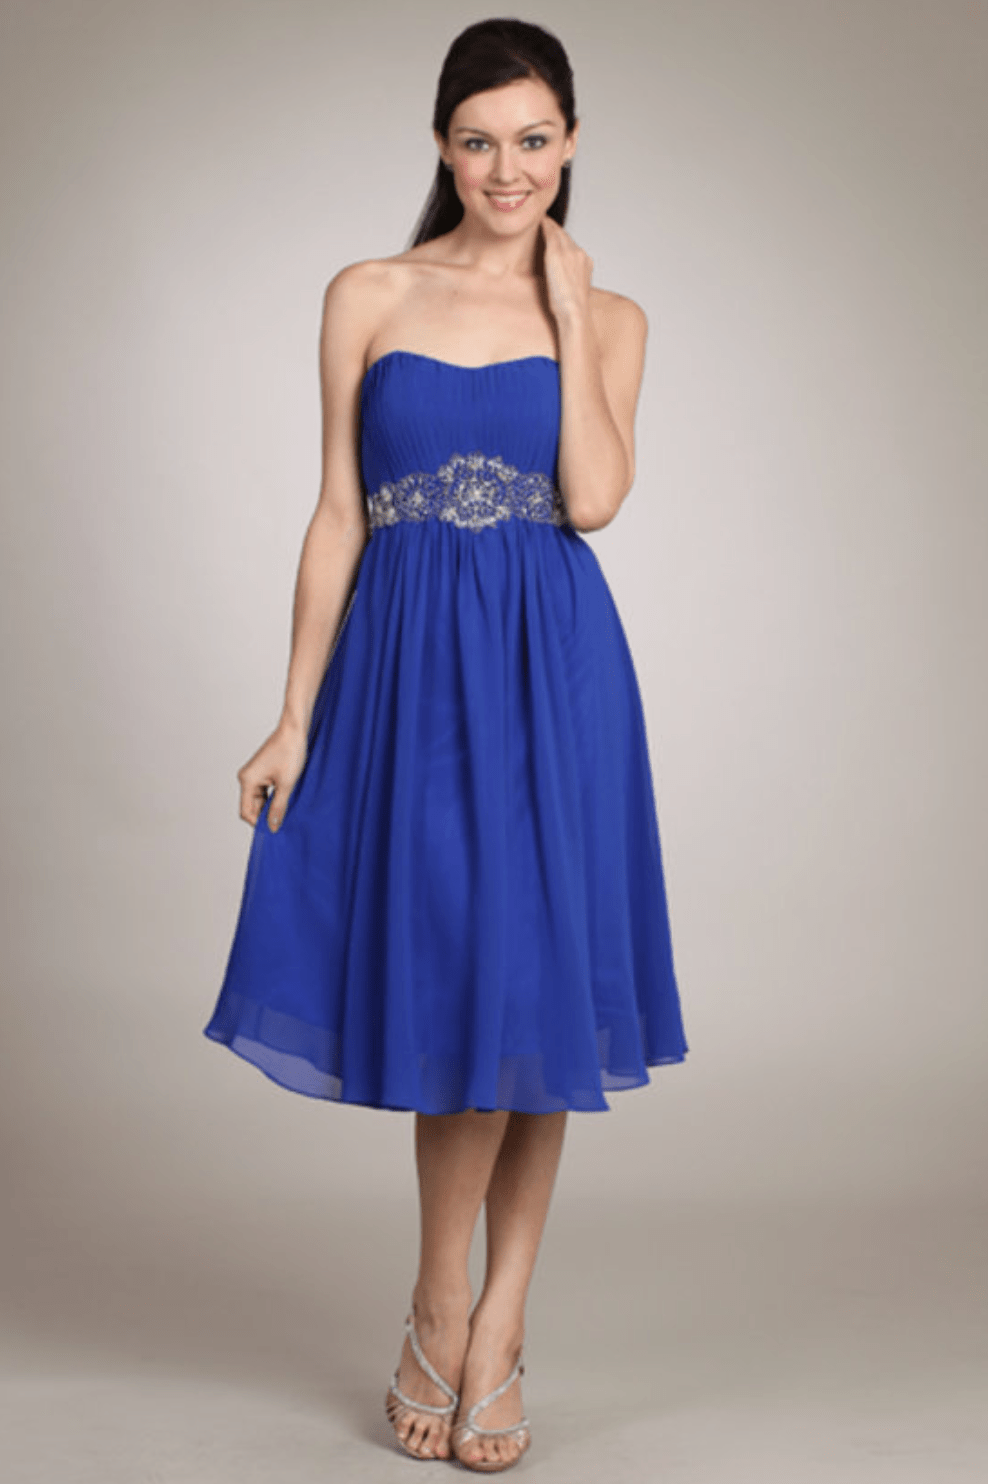 Strapless Sweetheart Chiffon Jewel Embroidered Dress by Fiesta | 11 Colors - NORMA REED